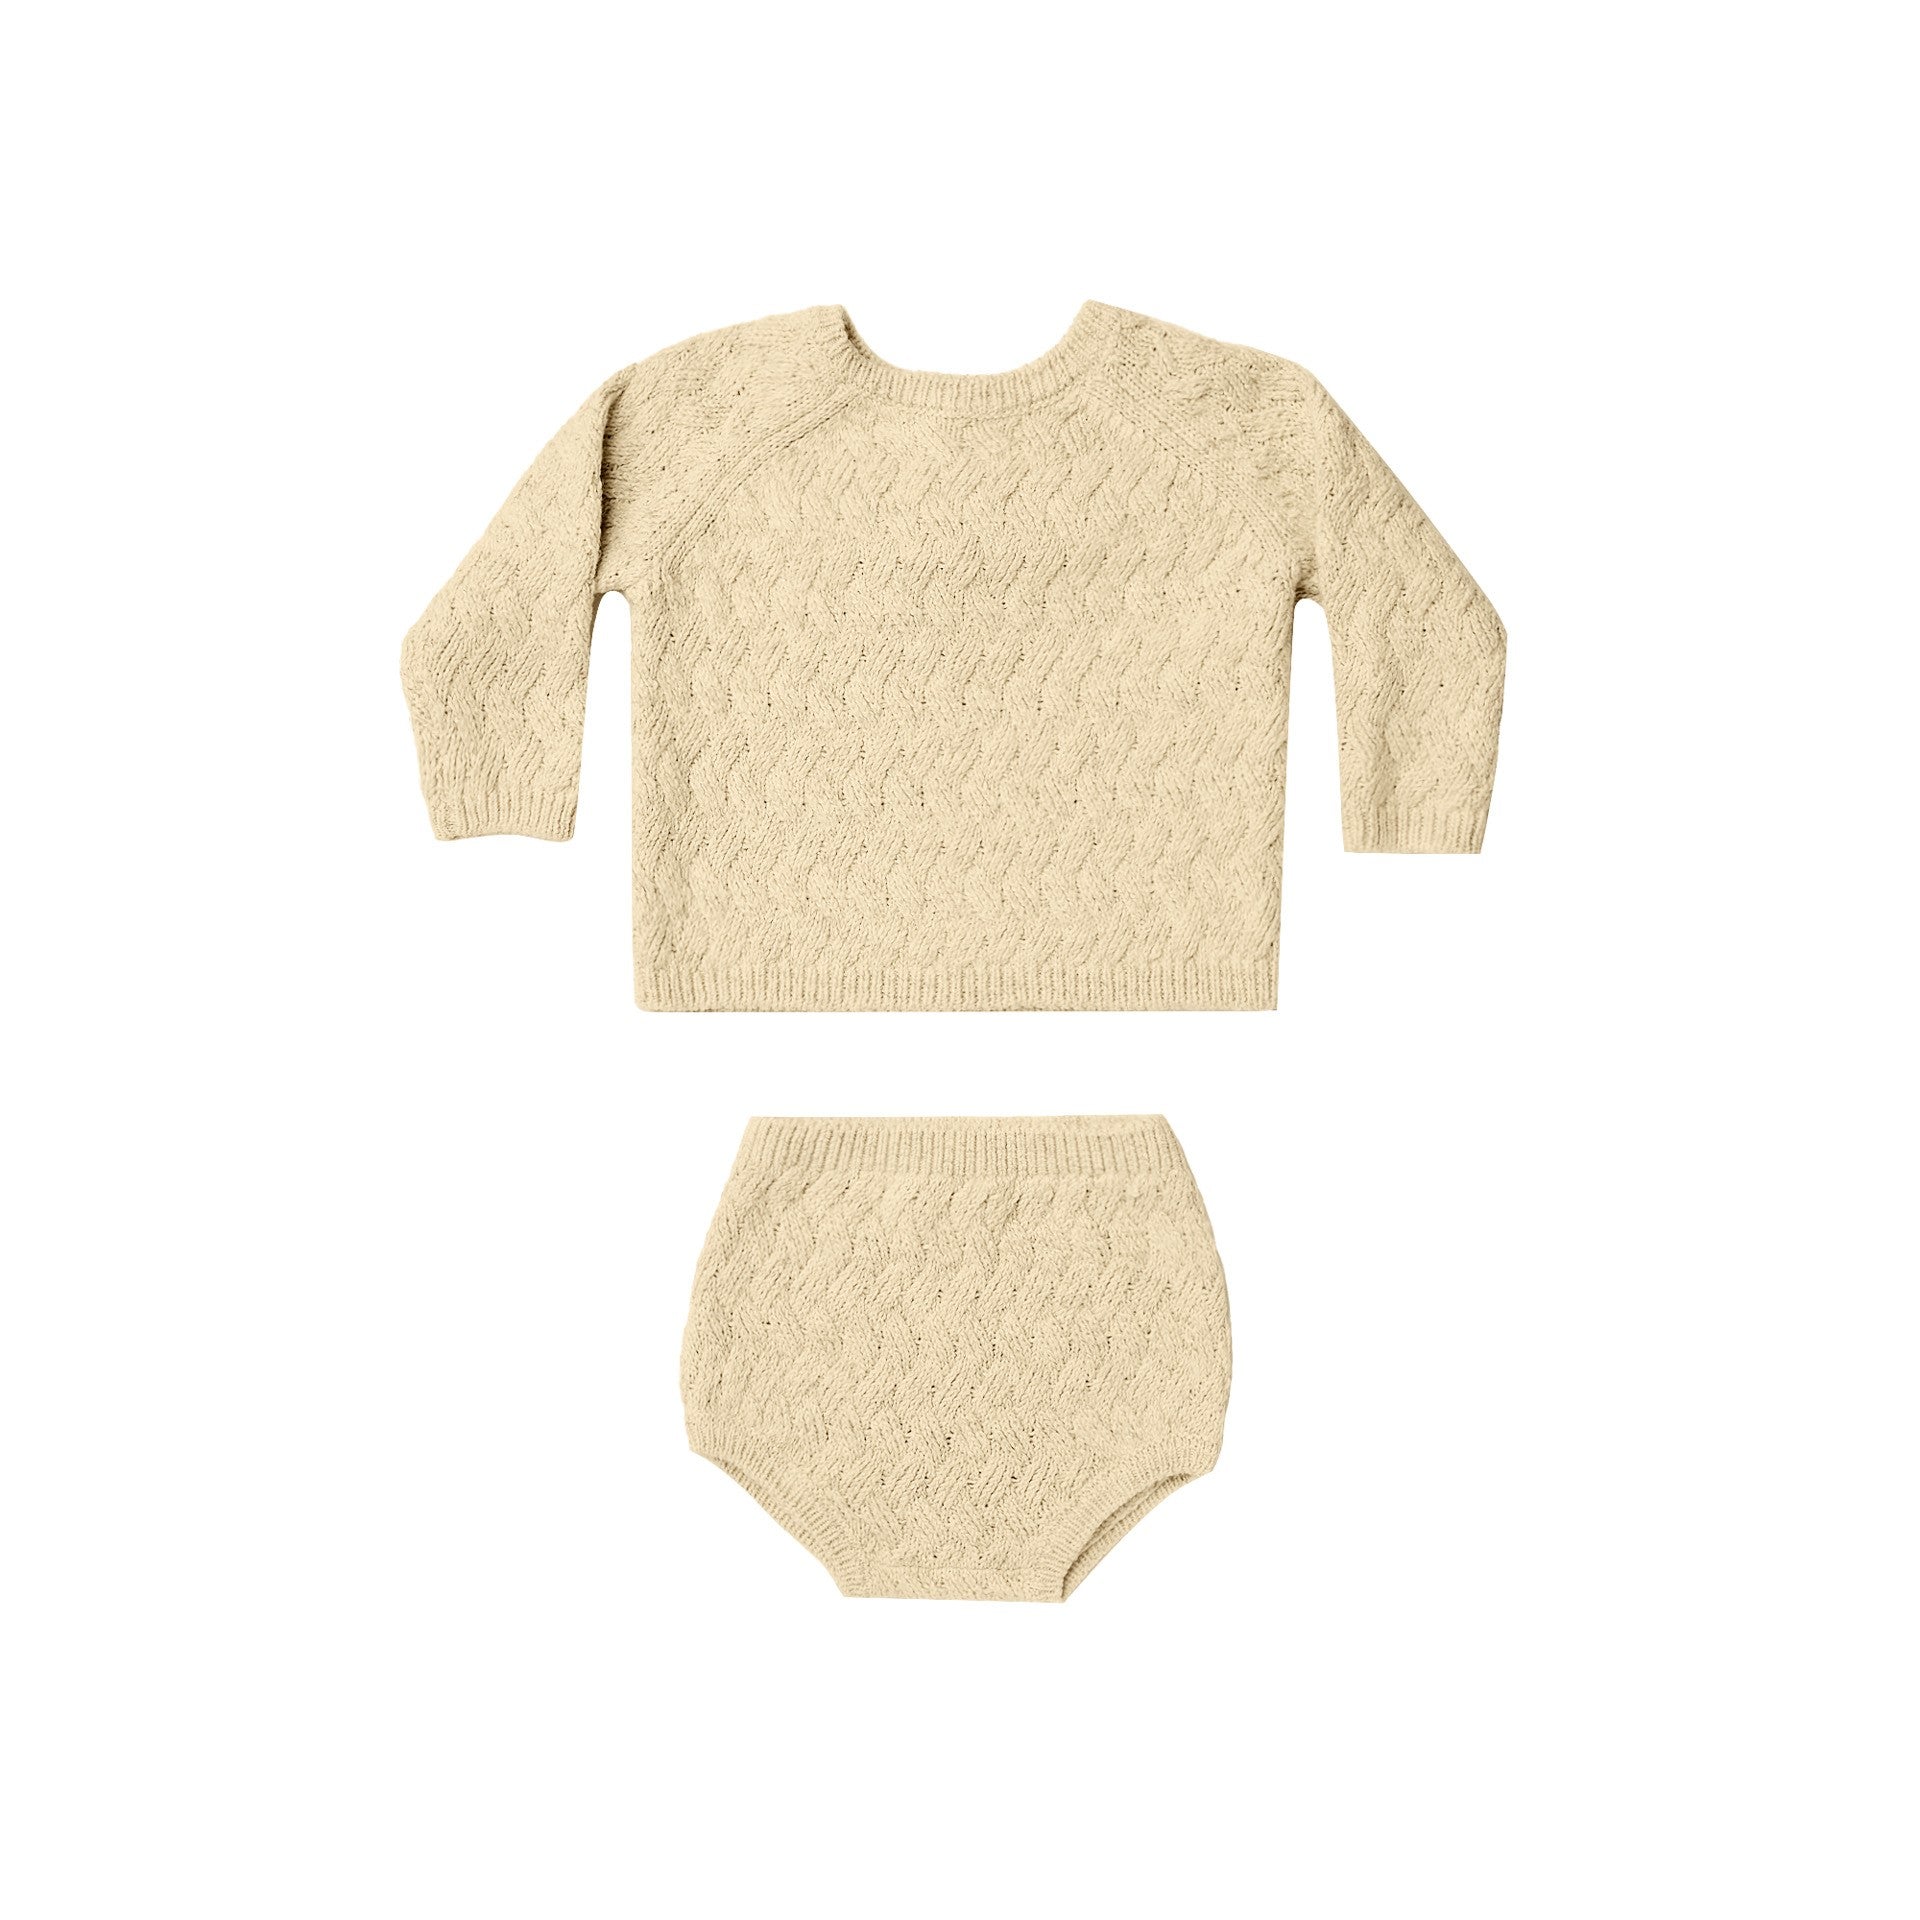 QUINCY MAE Mira Knit Set Heathered Yellow ALWAYS SHOW